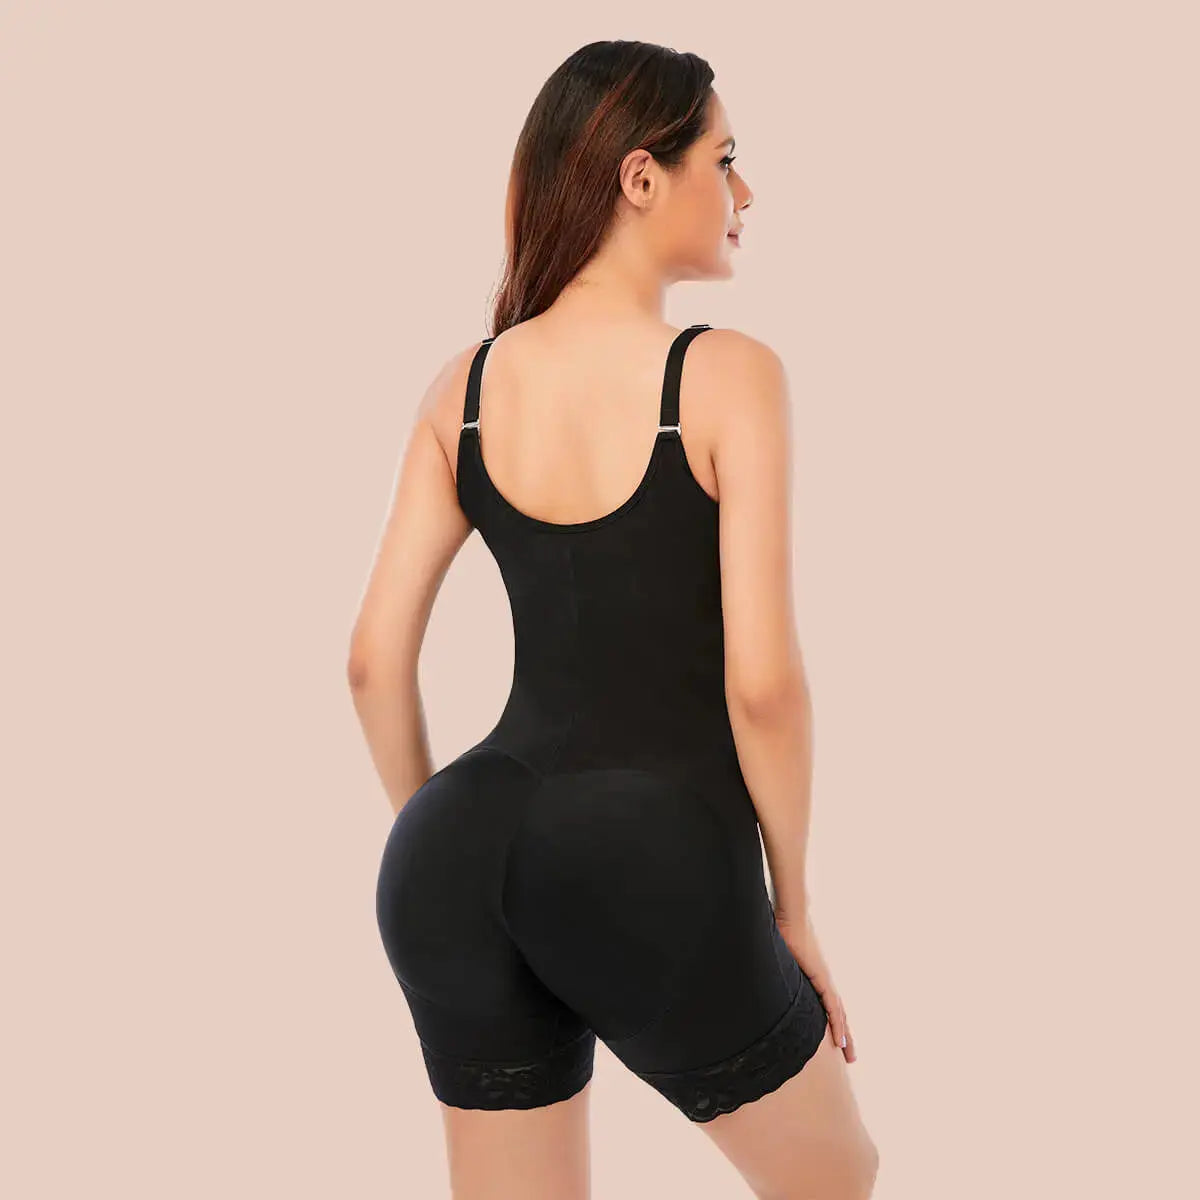 HIBRO High Compression Body Shaper Lace Colombian Fajas Shapewear Bodysuit  Fajas Reductoras De Latex Sleek And Lean Body Shaped Camisole Women  Undergarments for Stomach Control Sweat Band Waist 